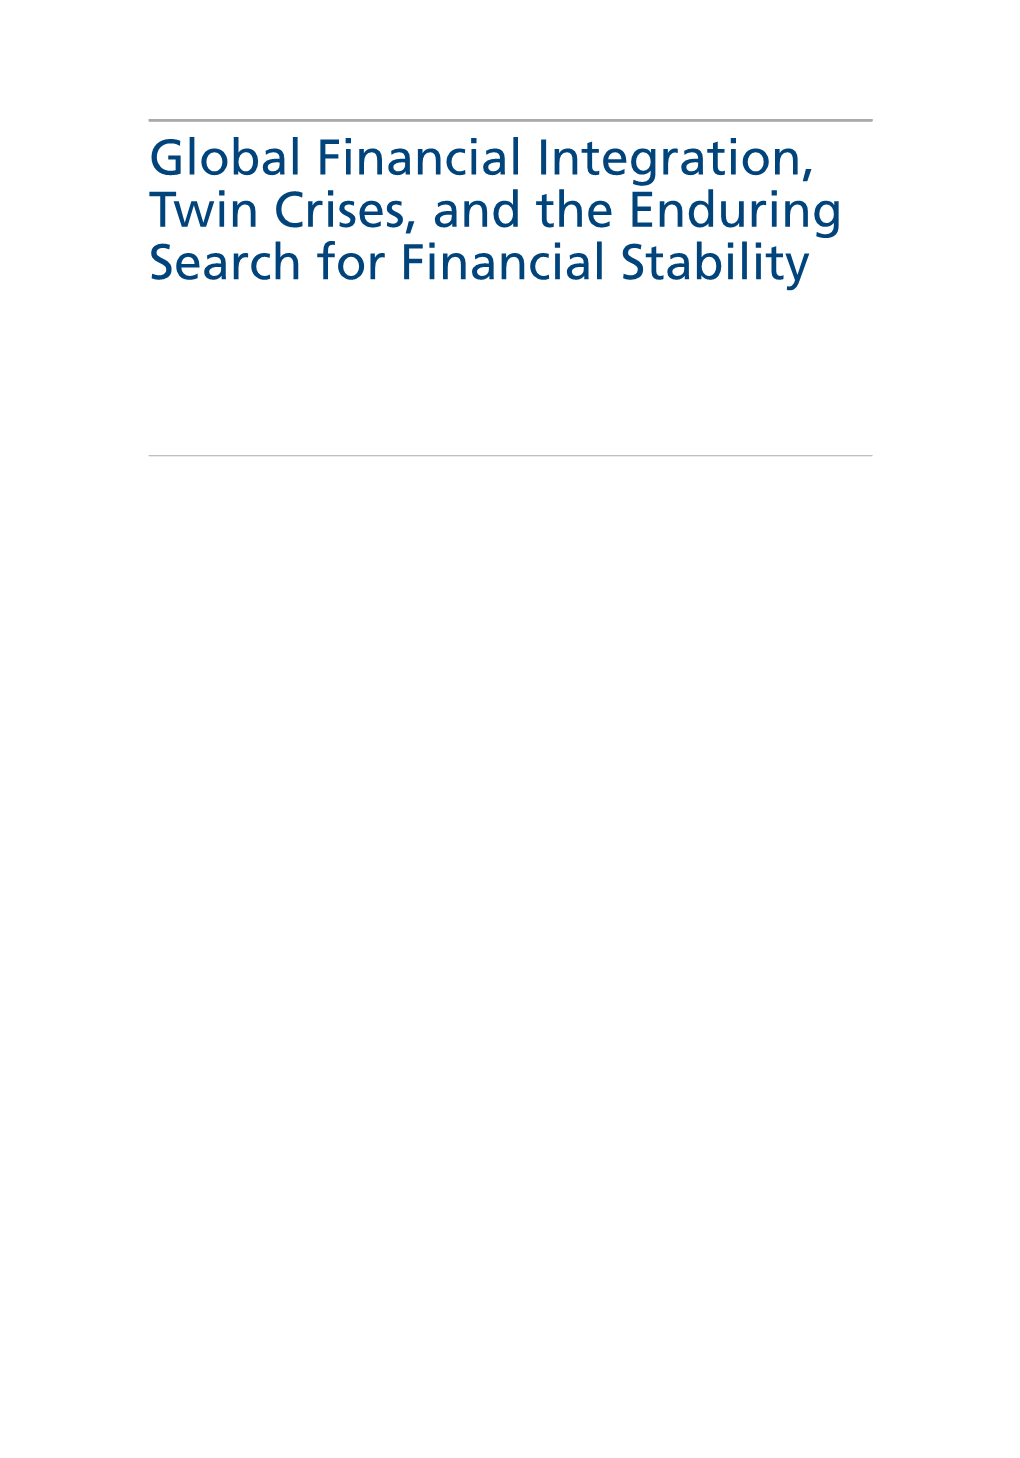 Global Financial Integration, Twin Crises, and the Enduring Search for Financial Stability Centre for Economic Policy Research (CEPR)